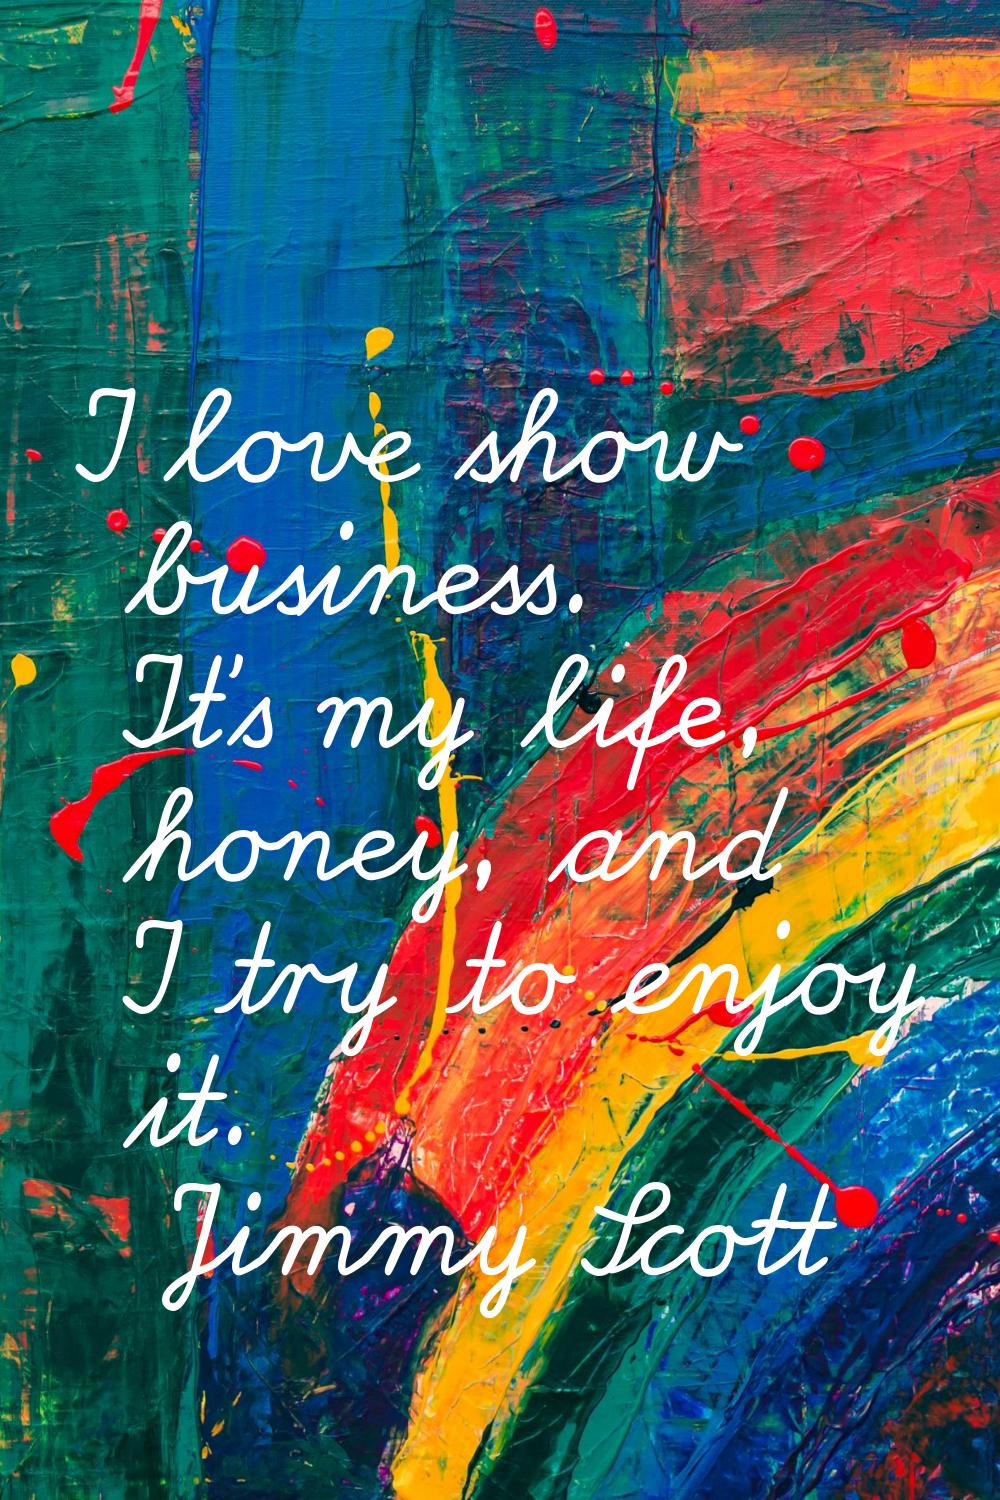 I love show business. It's my life, honey, and I try to enjoy it.